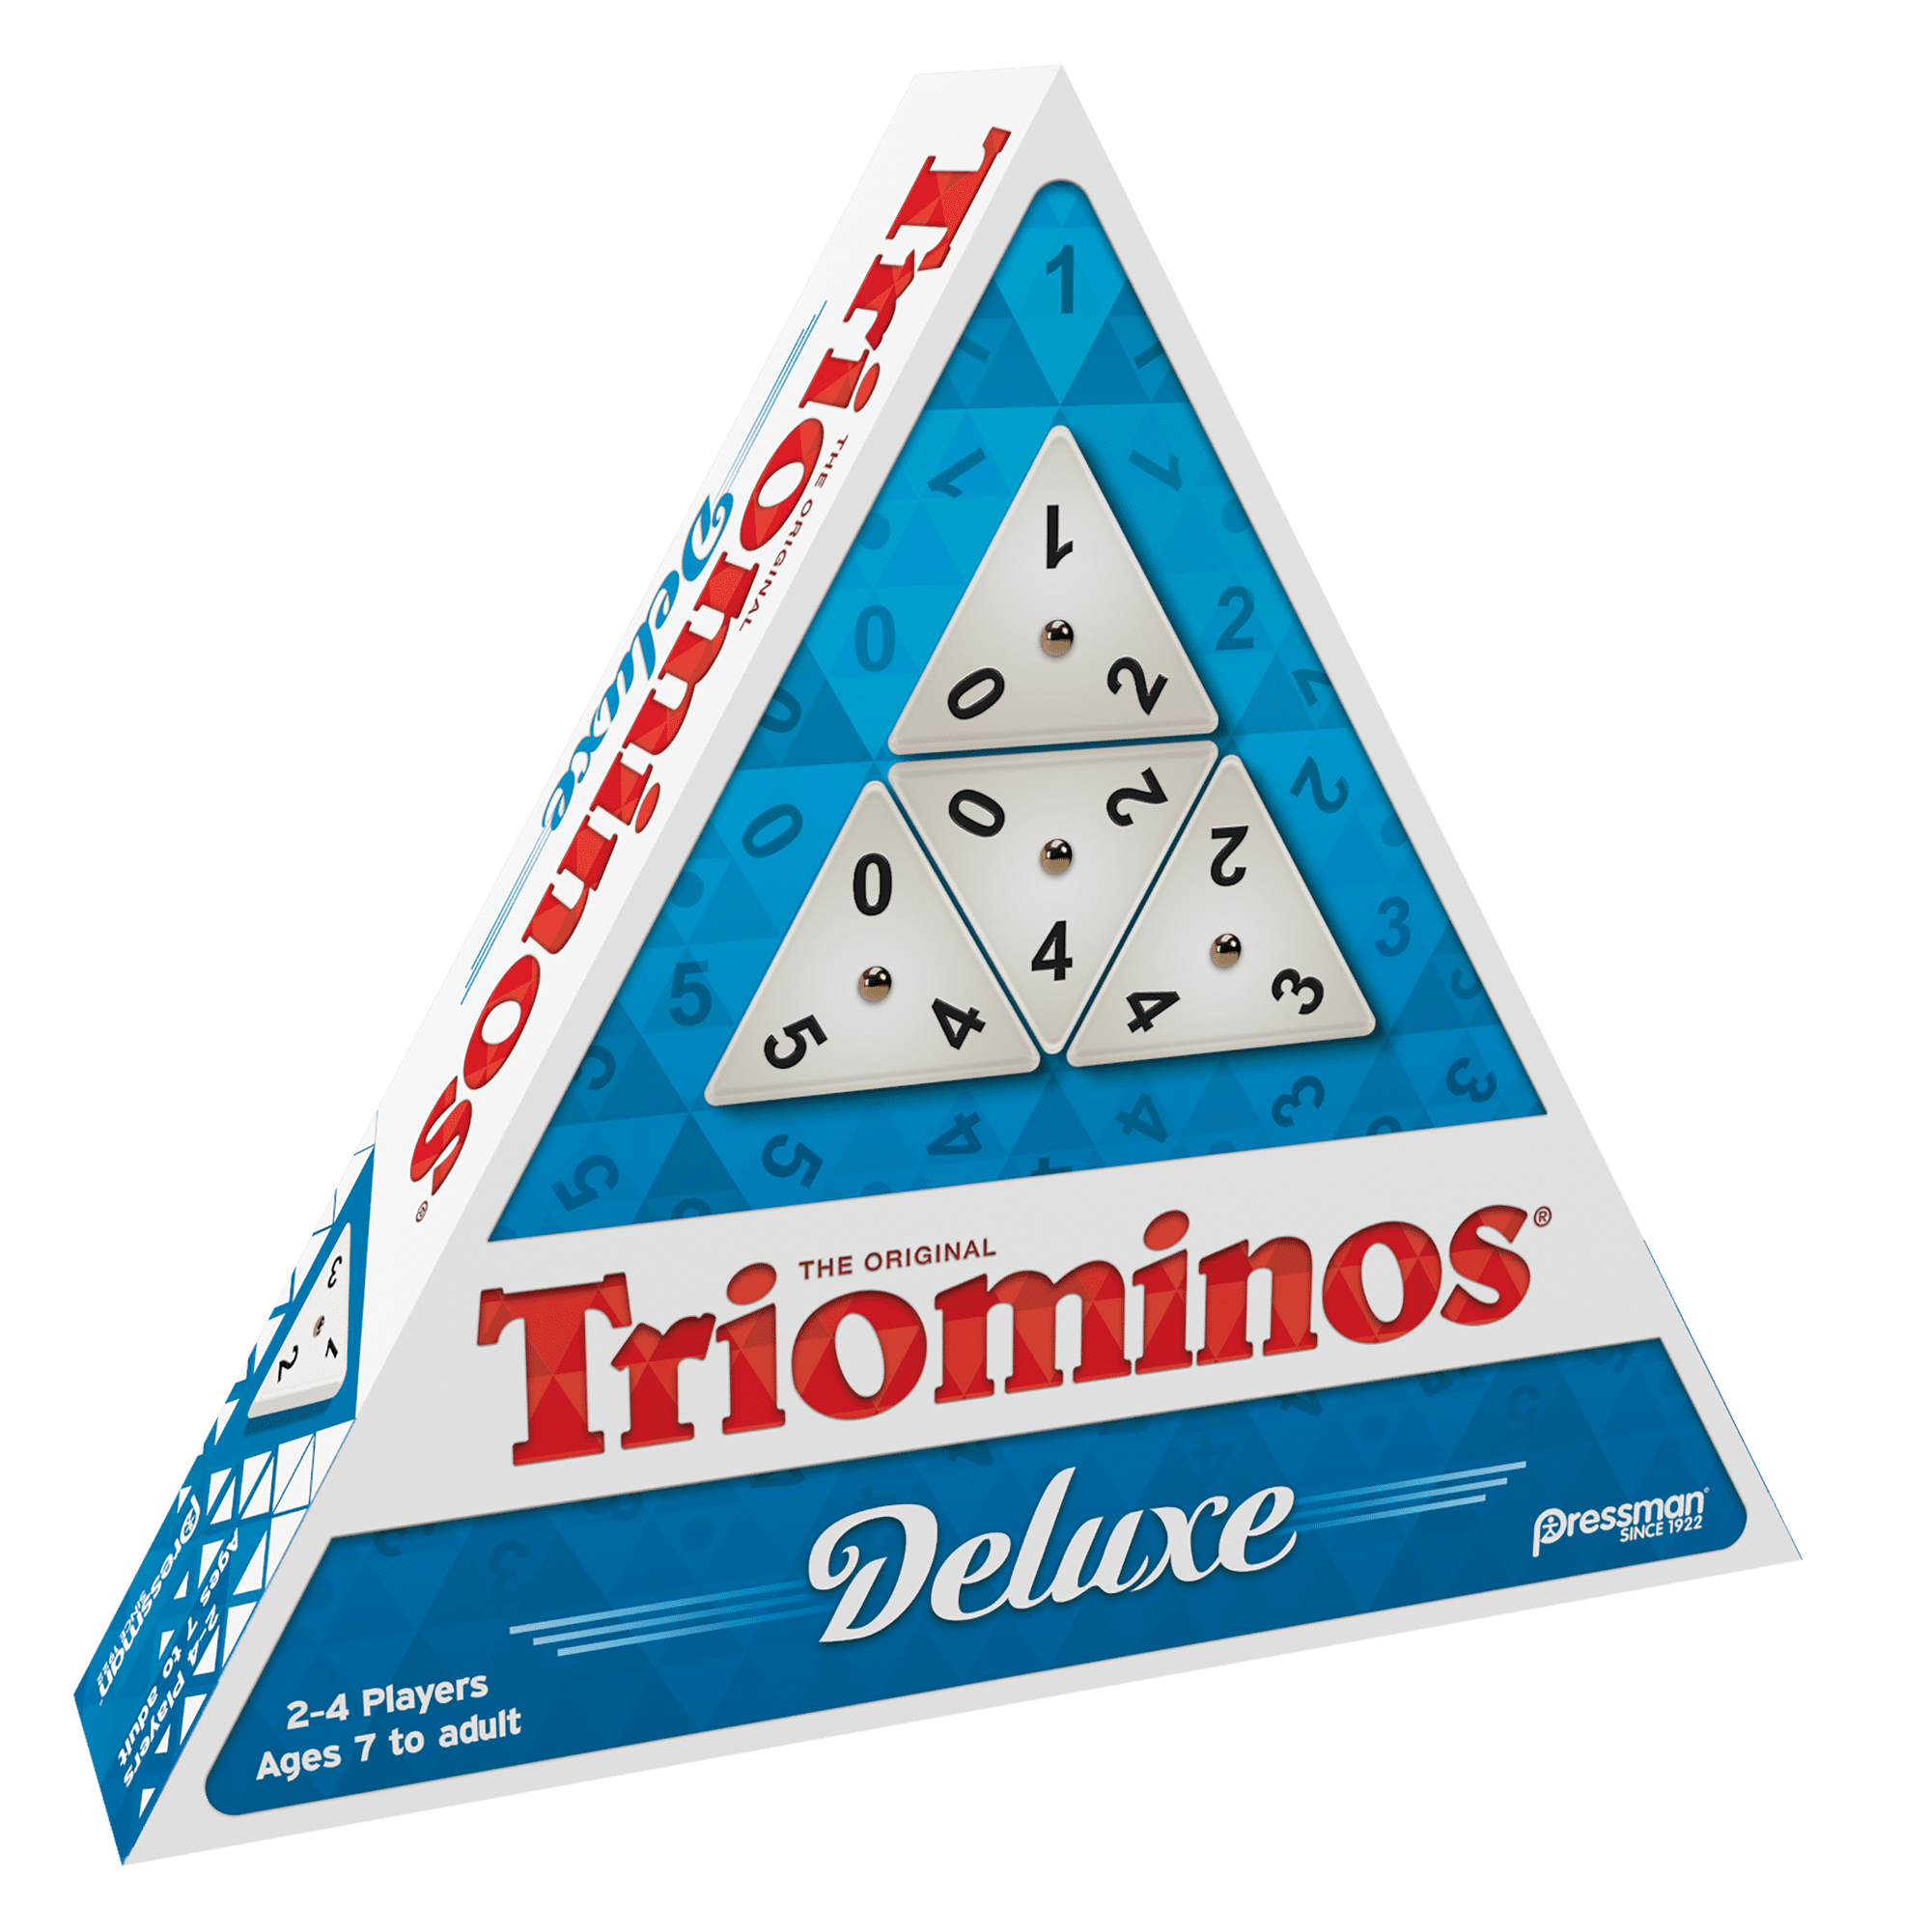 TRI-OMINOS Super Value TRIANGULAR DOMINO Game Pressman 2 To 6 Players Sealed New